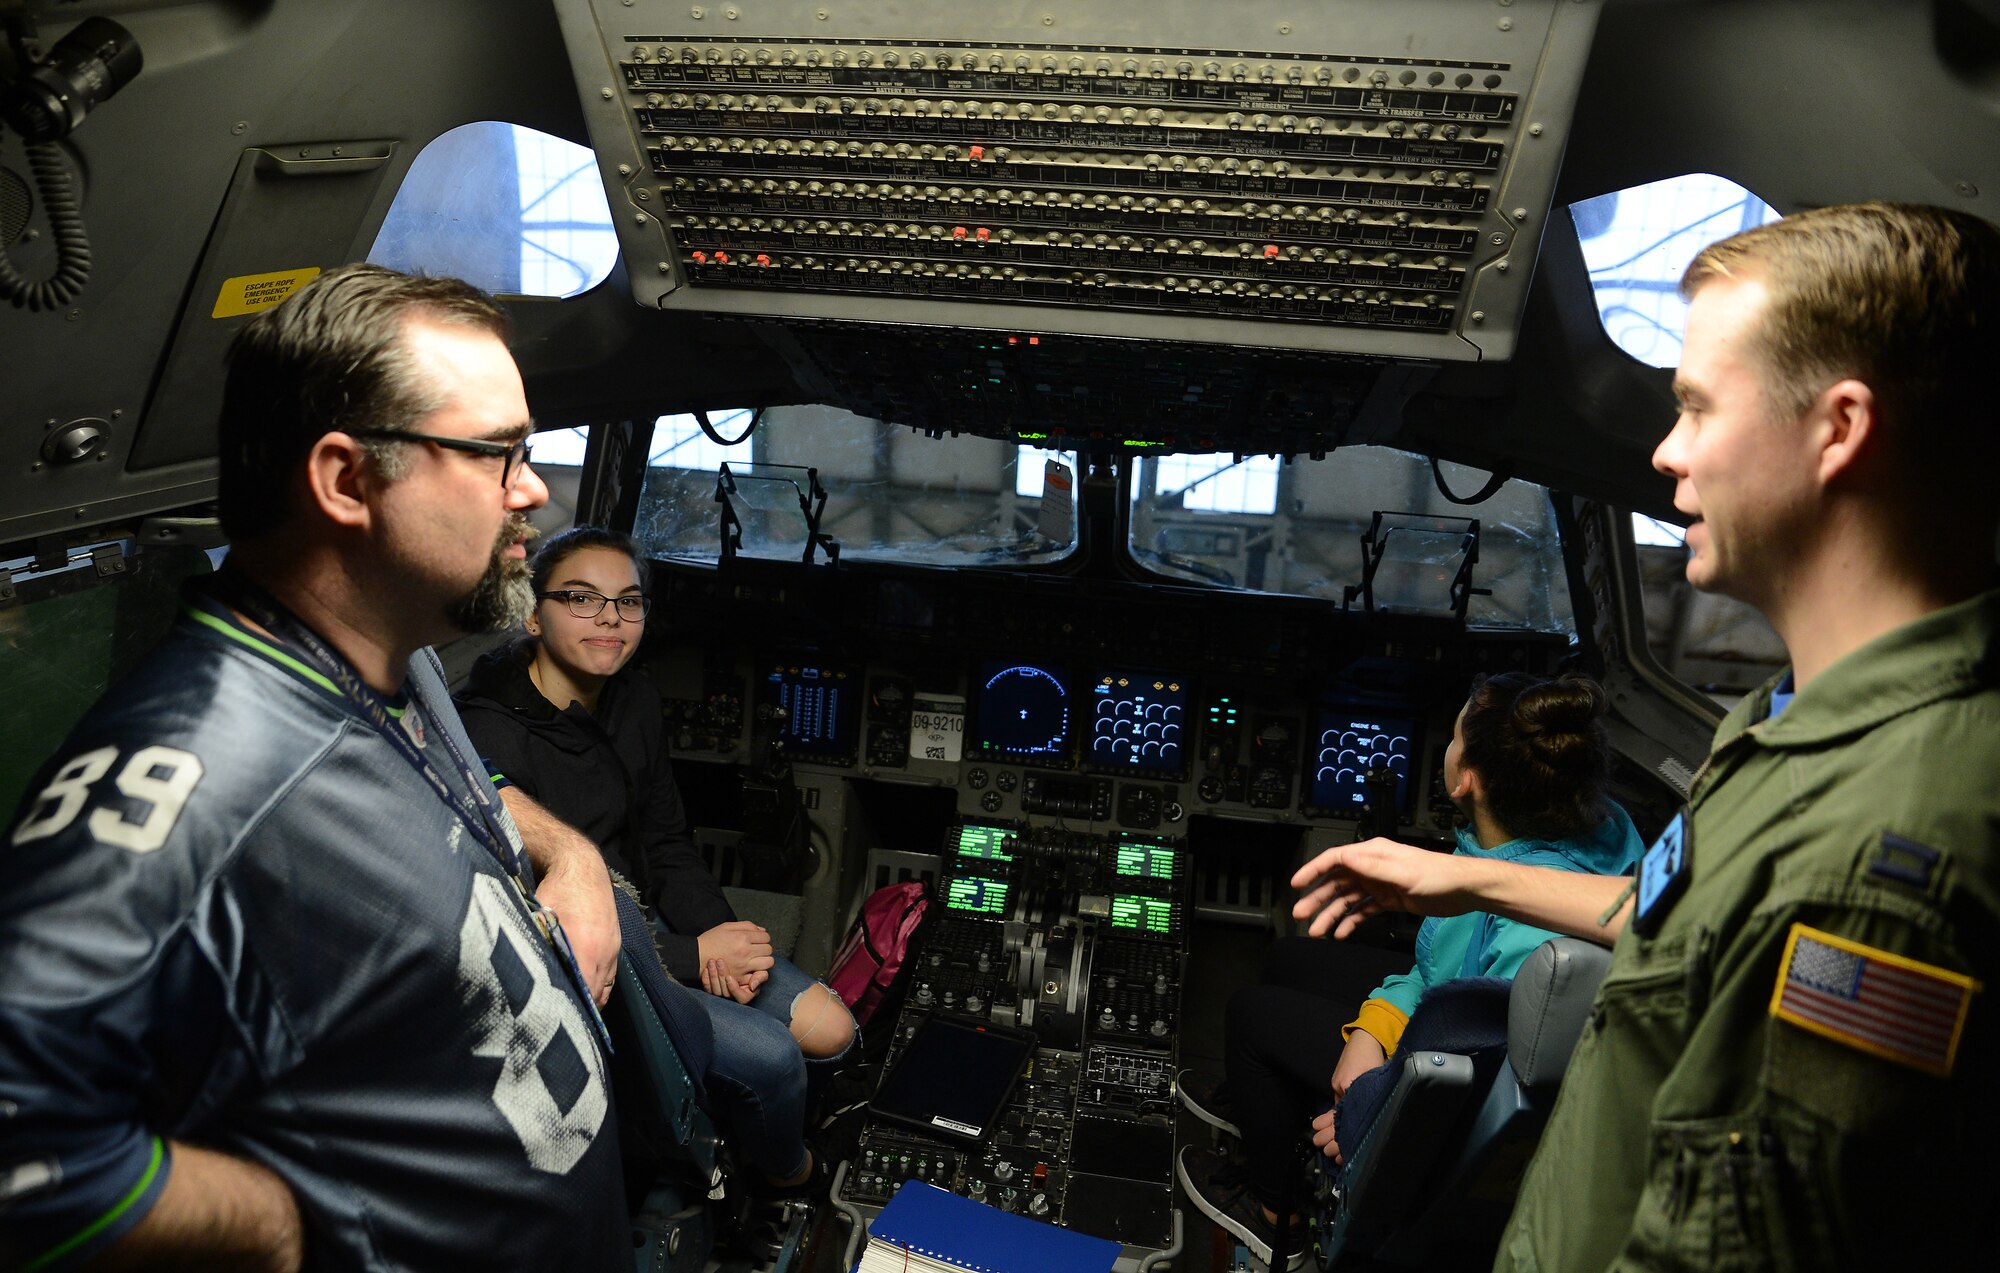 Students from Elk Plain School of Choice visits McChord Field during a Science, Technology, Engineering and Mathematics (STEM) event Dec. 14, 2018 at Joint Base Lewis-McChord, Wash.